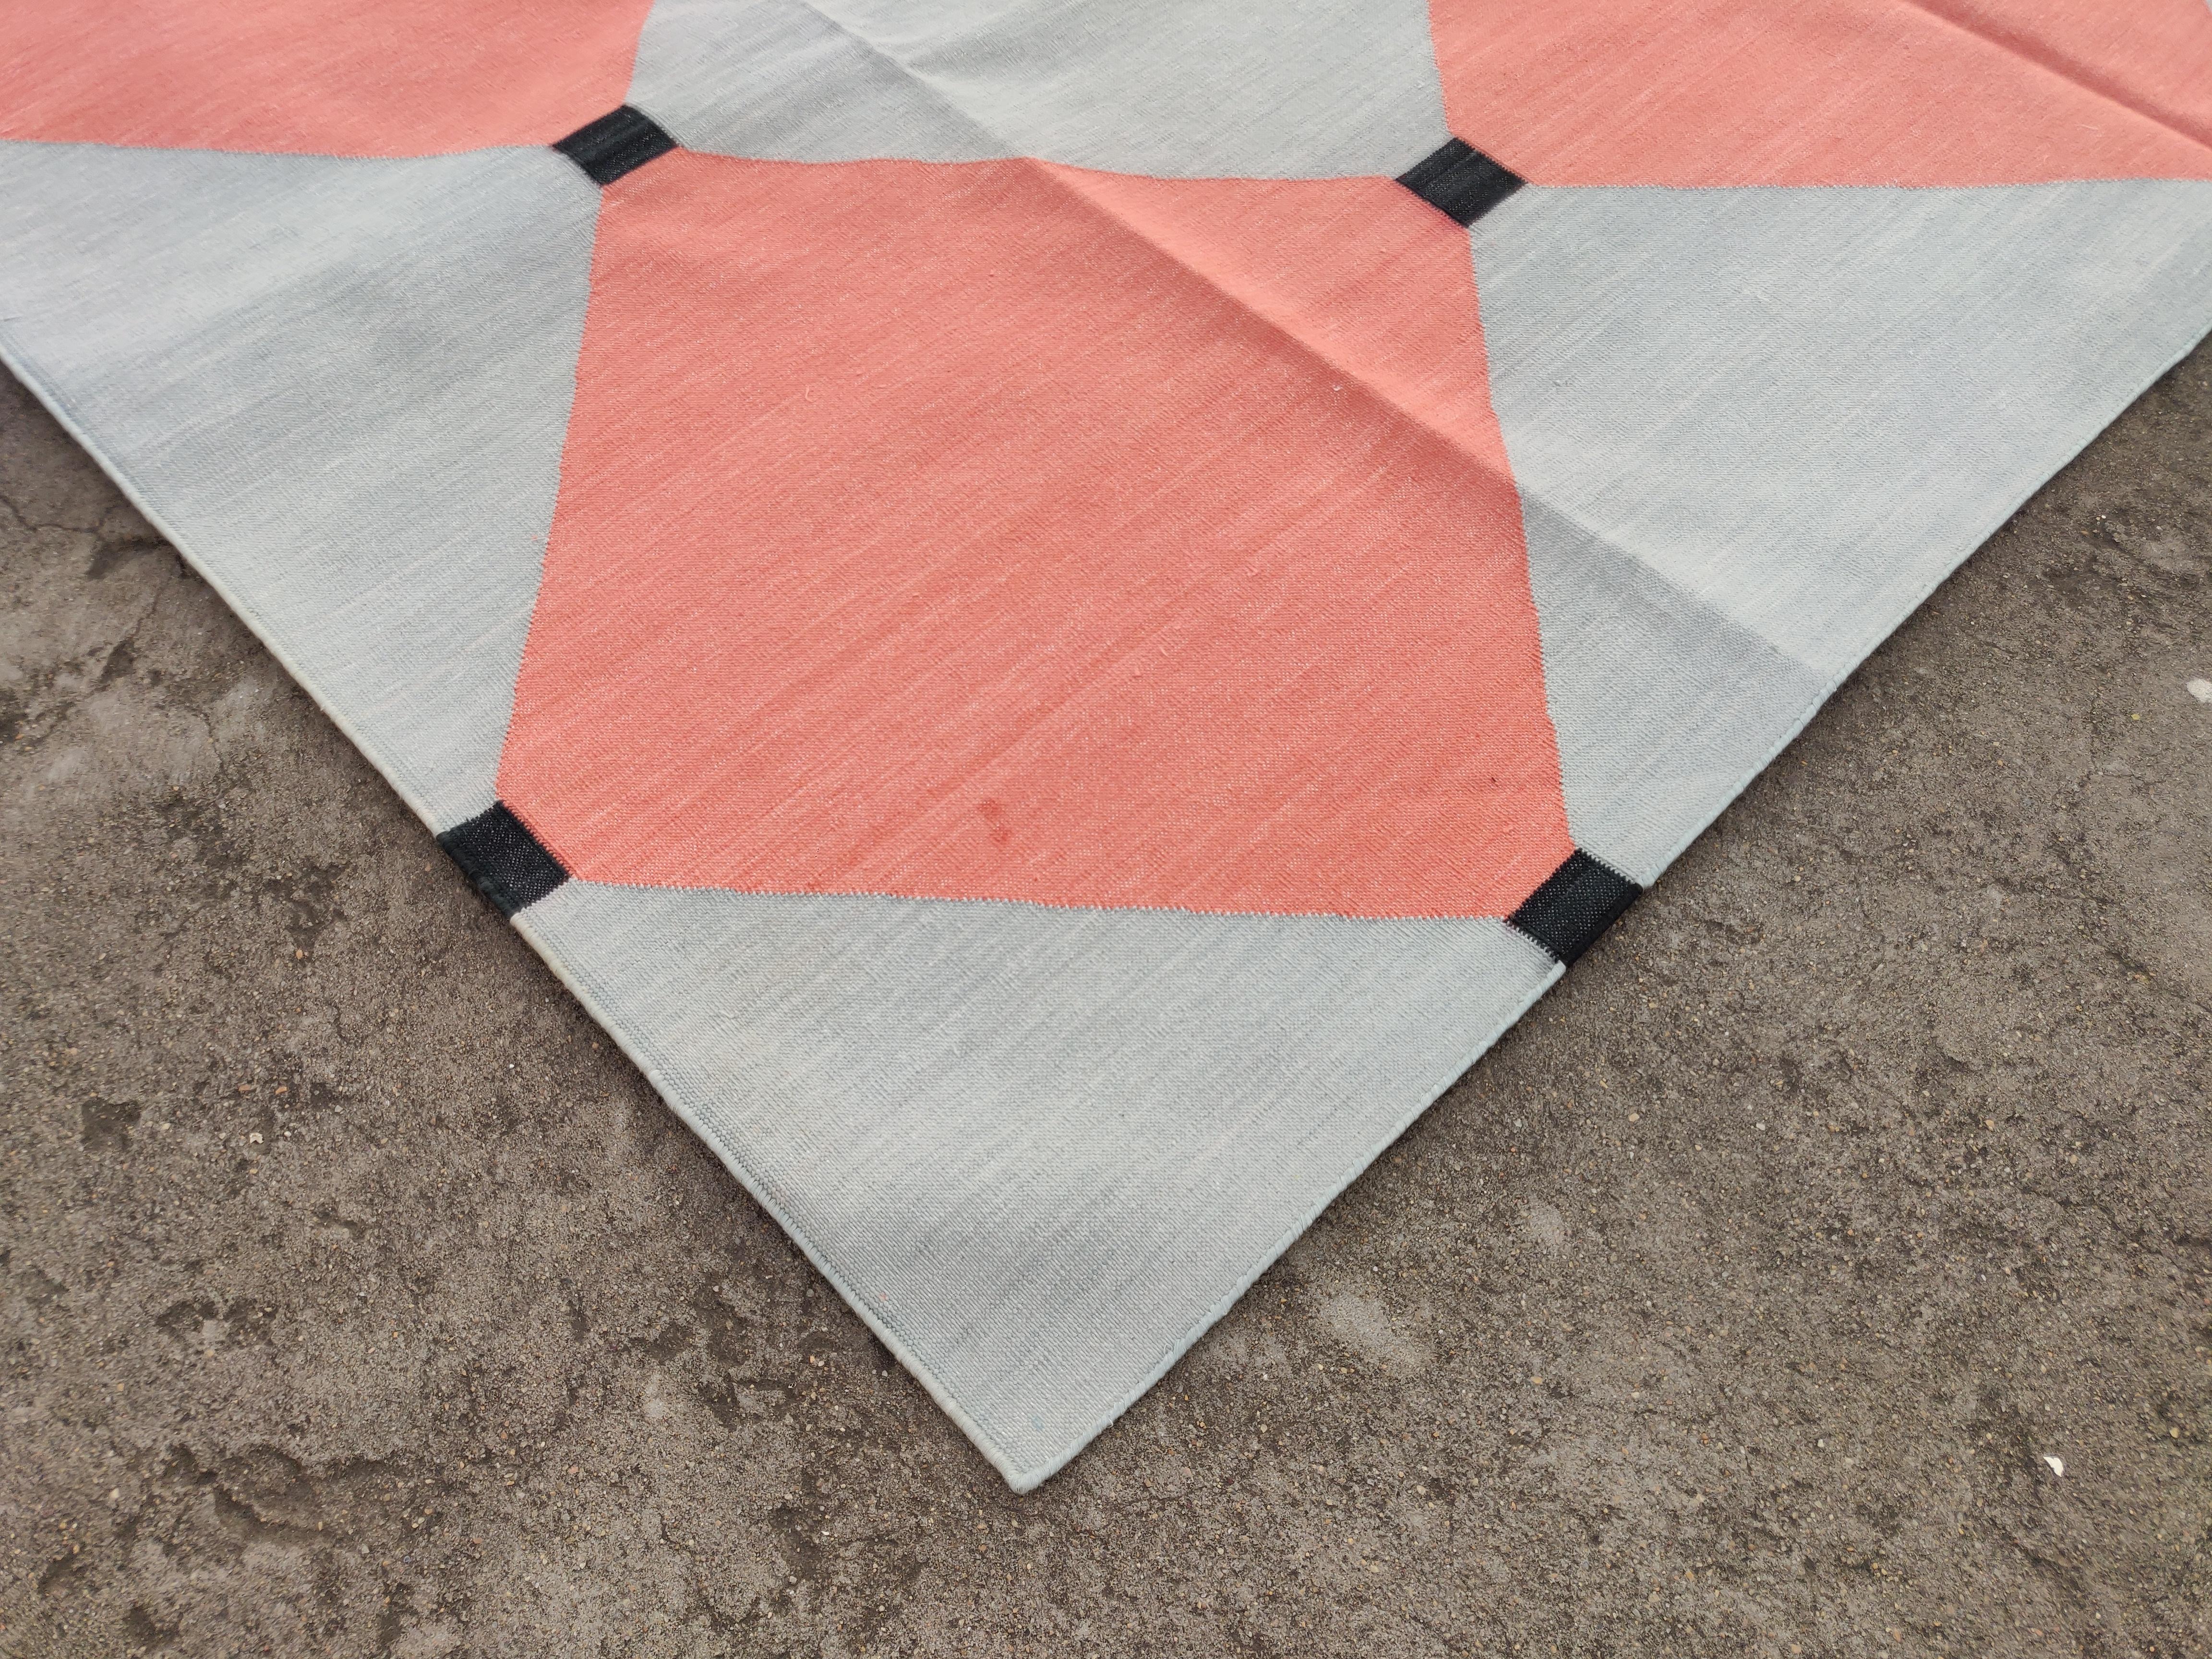 Mid-Century Modern Handmade Cotton Area Flat Weave Rug, 6x9 Grey And Coral Tile Patterned Dhurrie For Sale